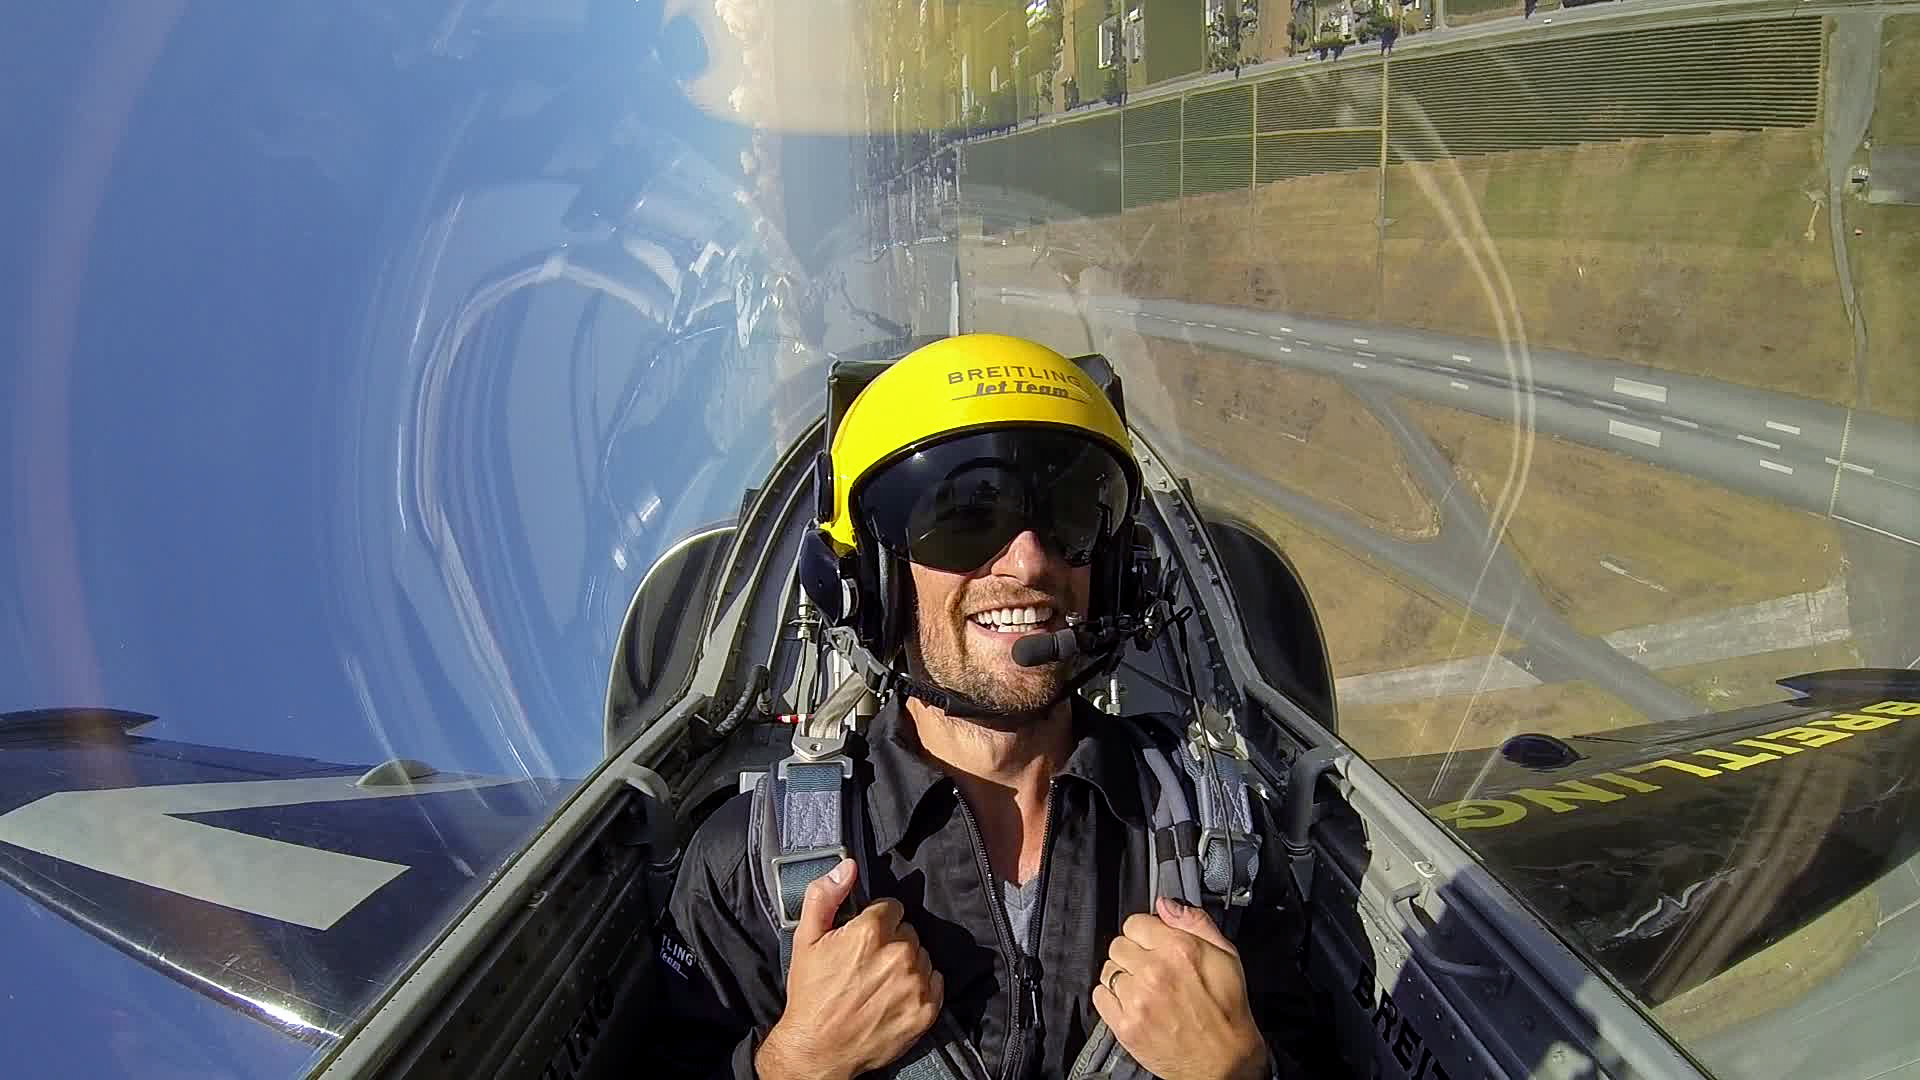 Daily Edit: Riding Shotgun with the Breitling Jet Team